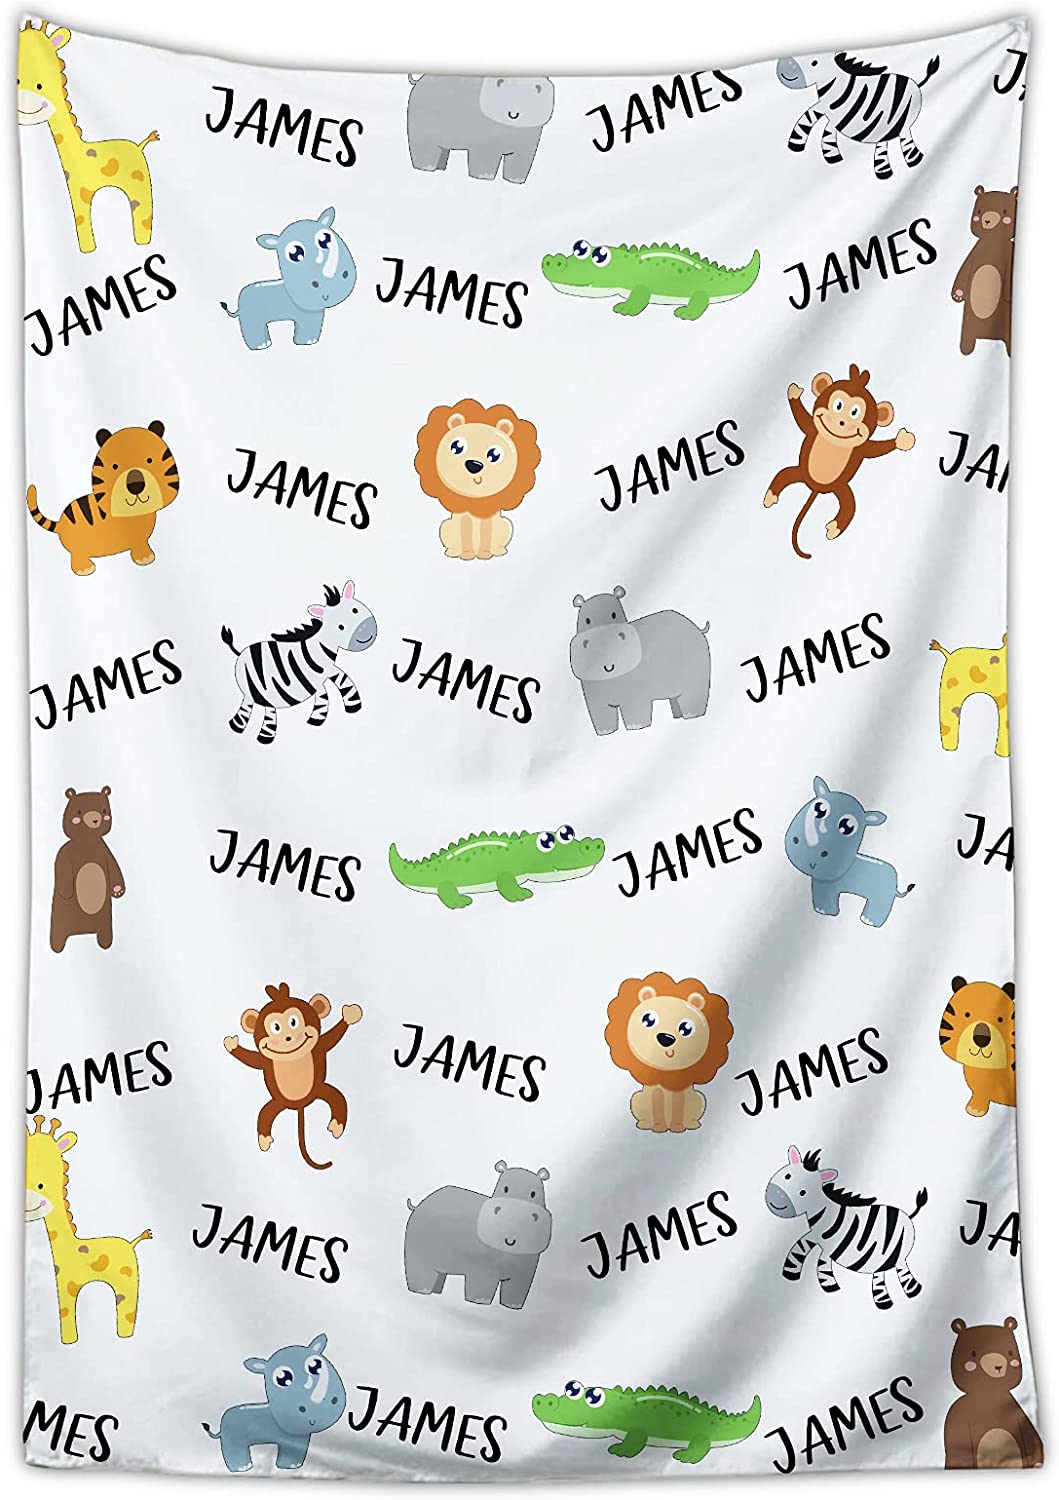 Personalized Custom Baby Blankets with Name for Boys, Customized Name Blanket for Infants Newborns Kids